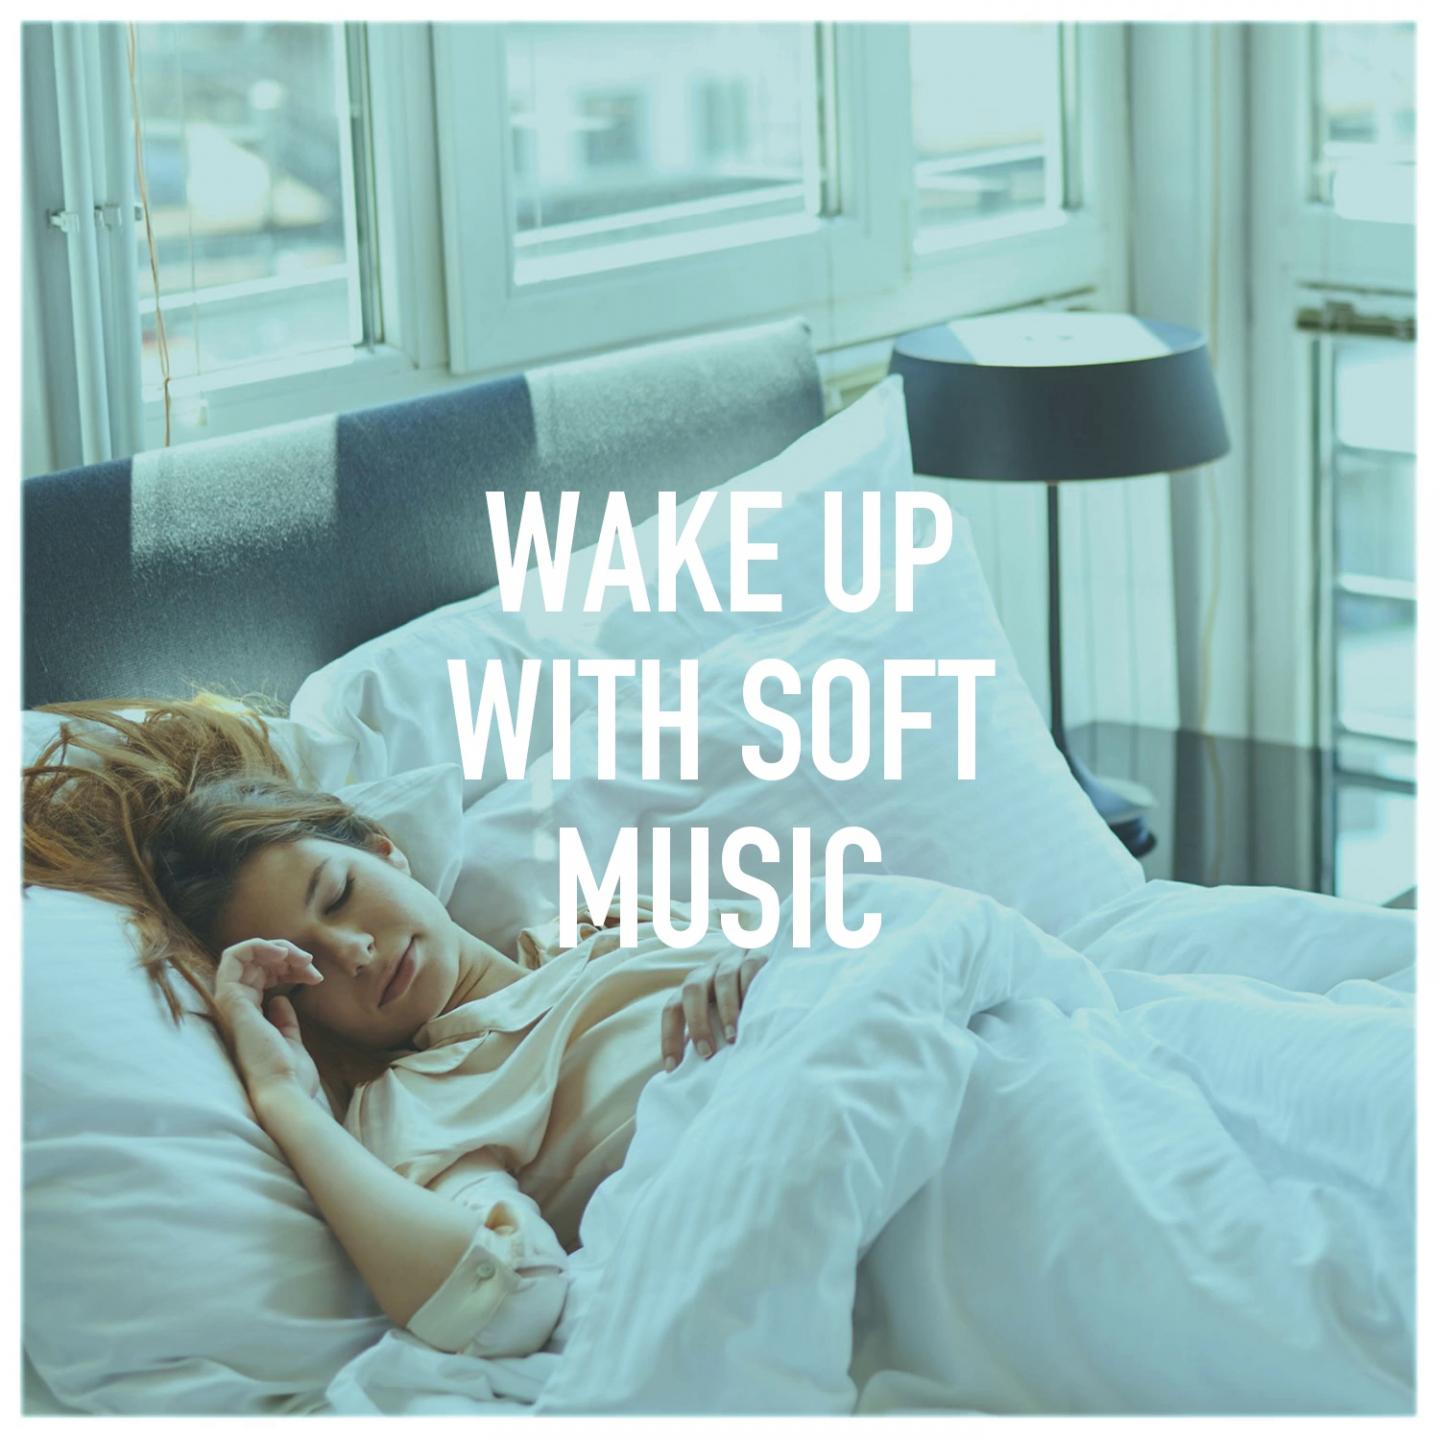 Wake up with soft music